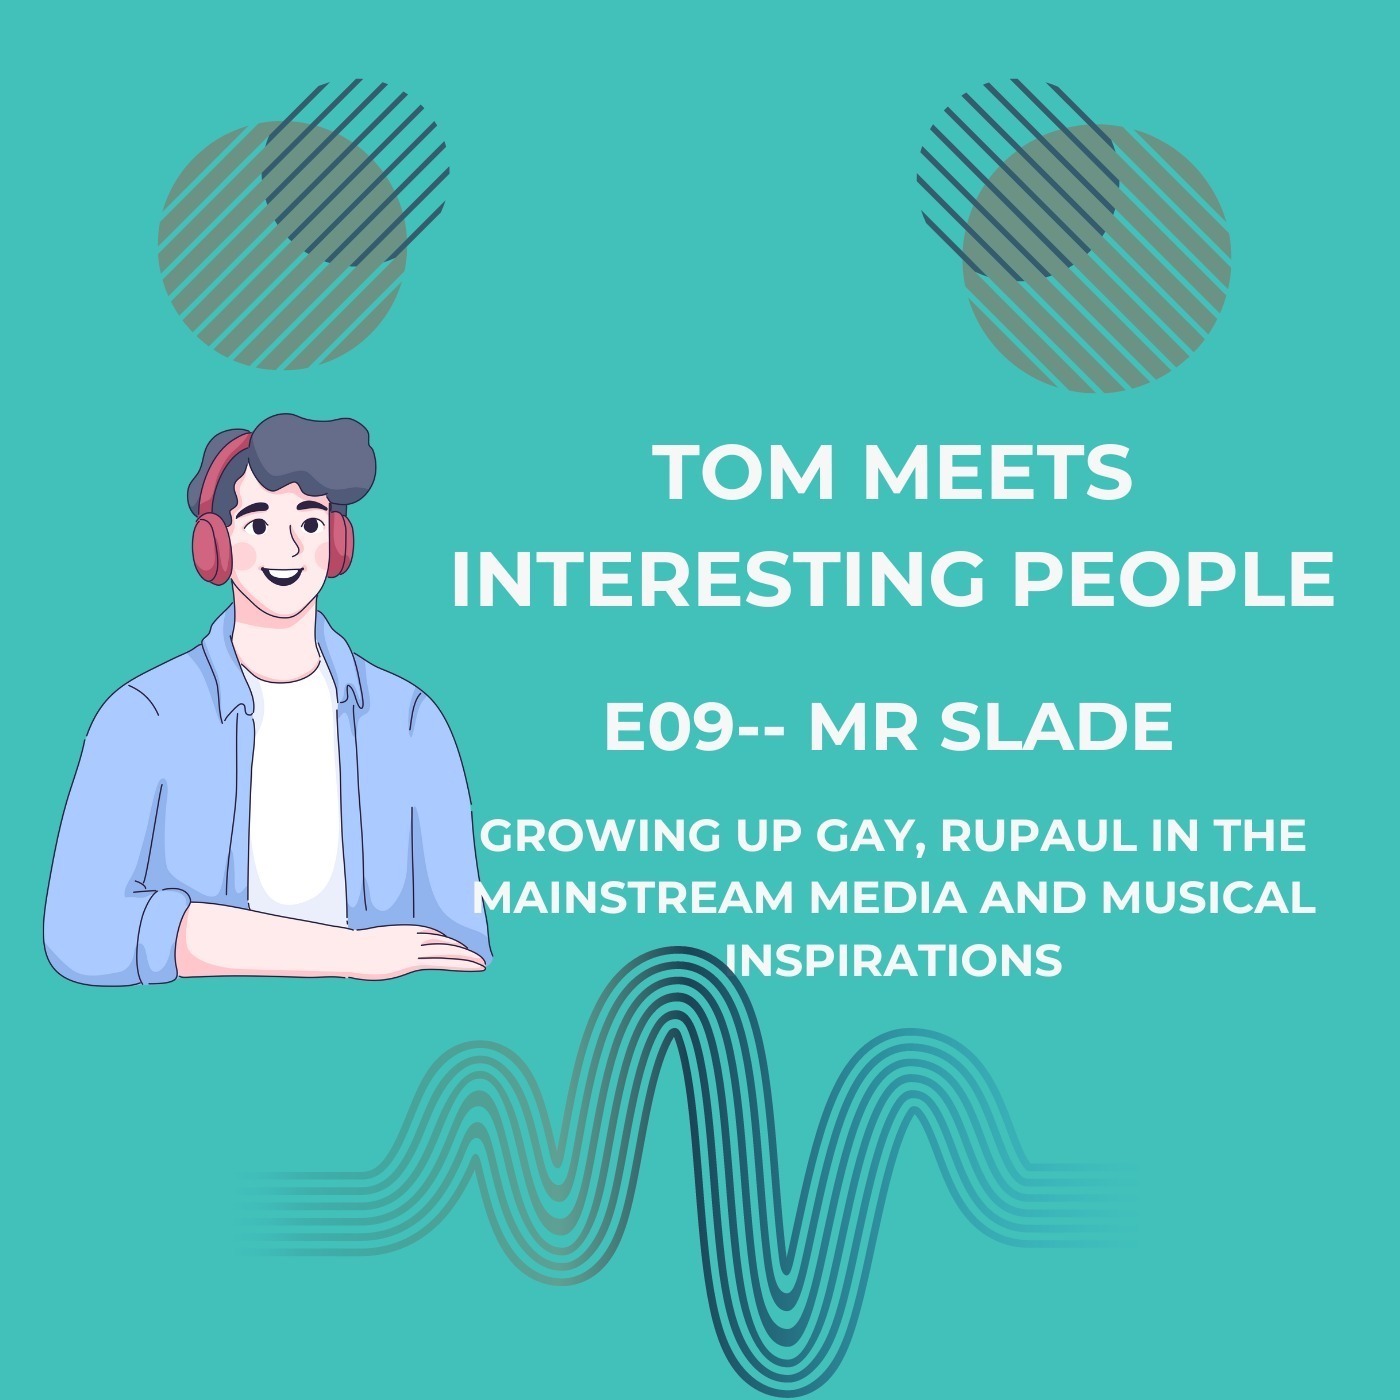 E09: Mr Slade: Growing Up Gay, Rupaul in the Mainstream Media and Musical Inspirations